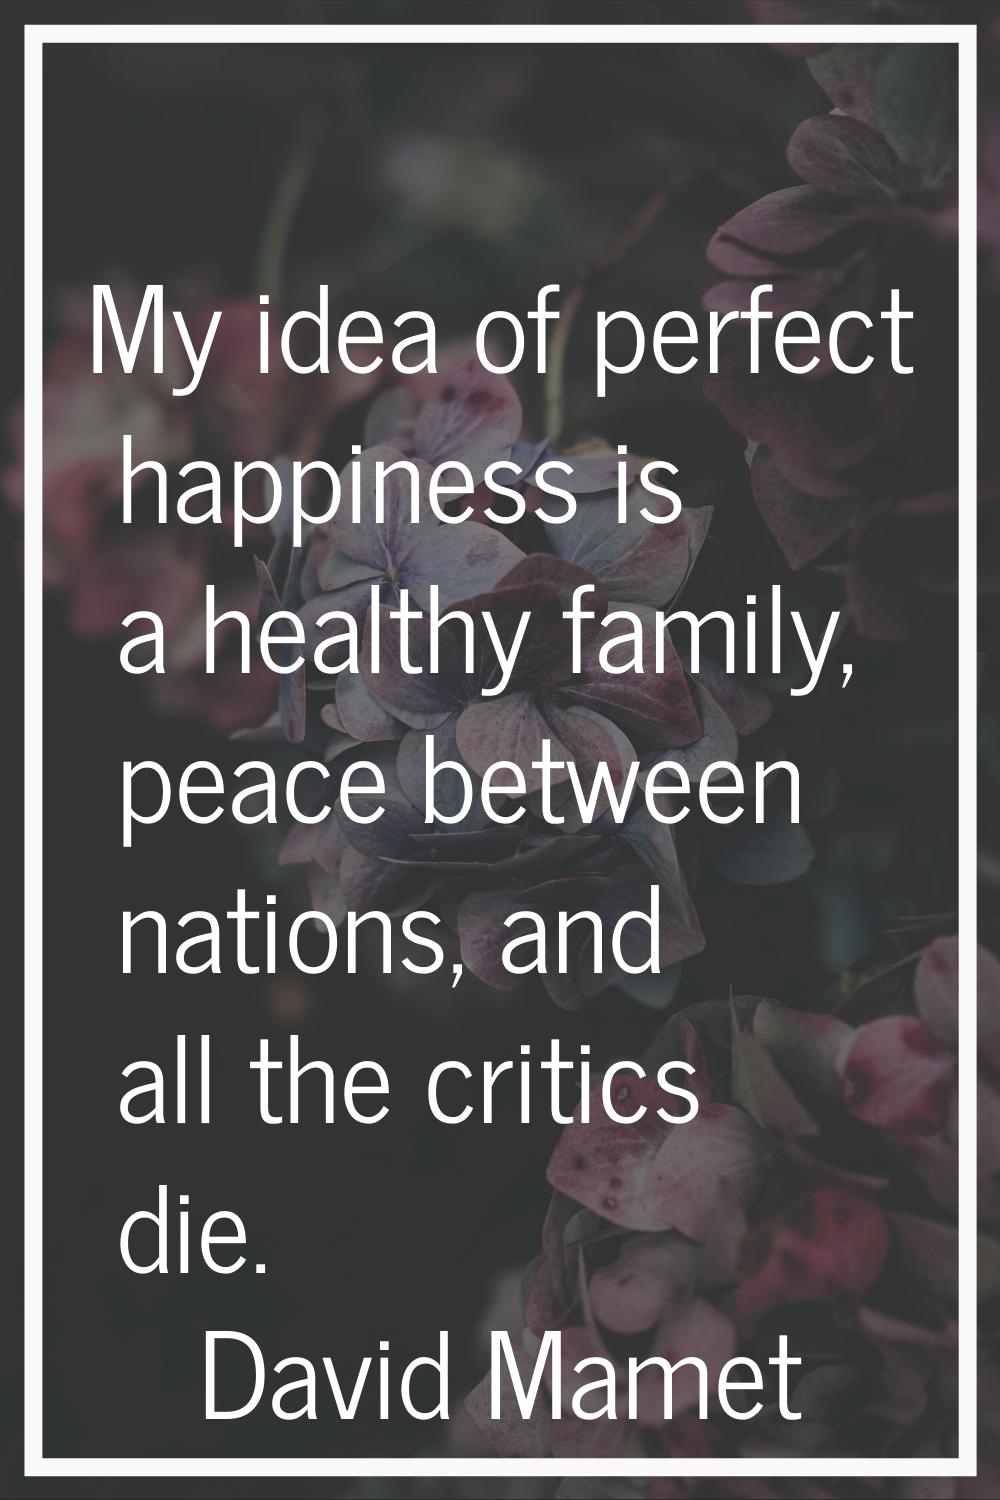 My idea of perfect happiness is a healthy family, peace between nations, and all the critics die.